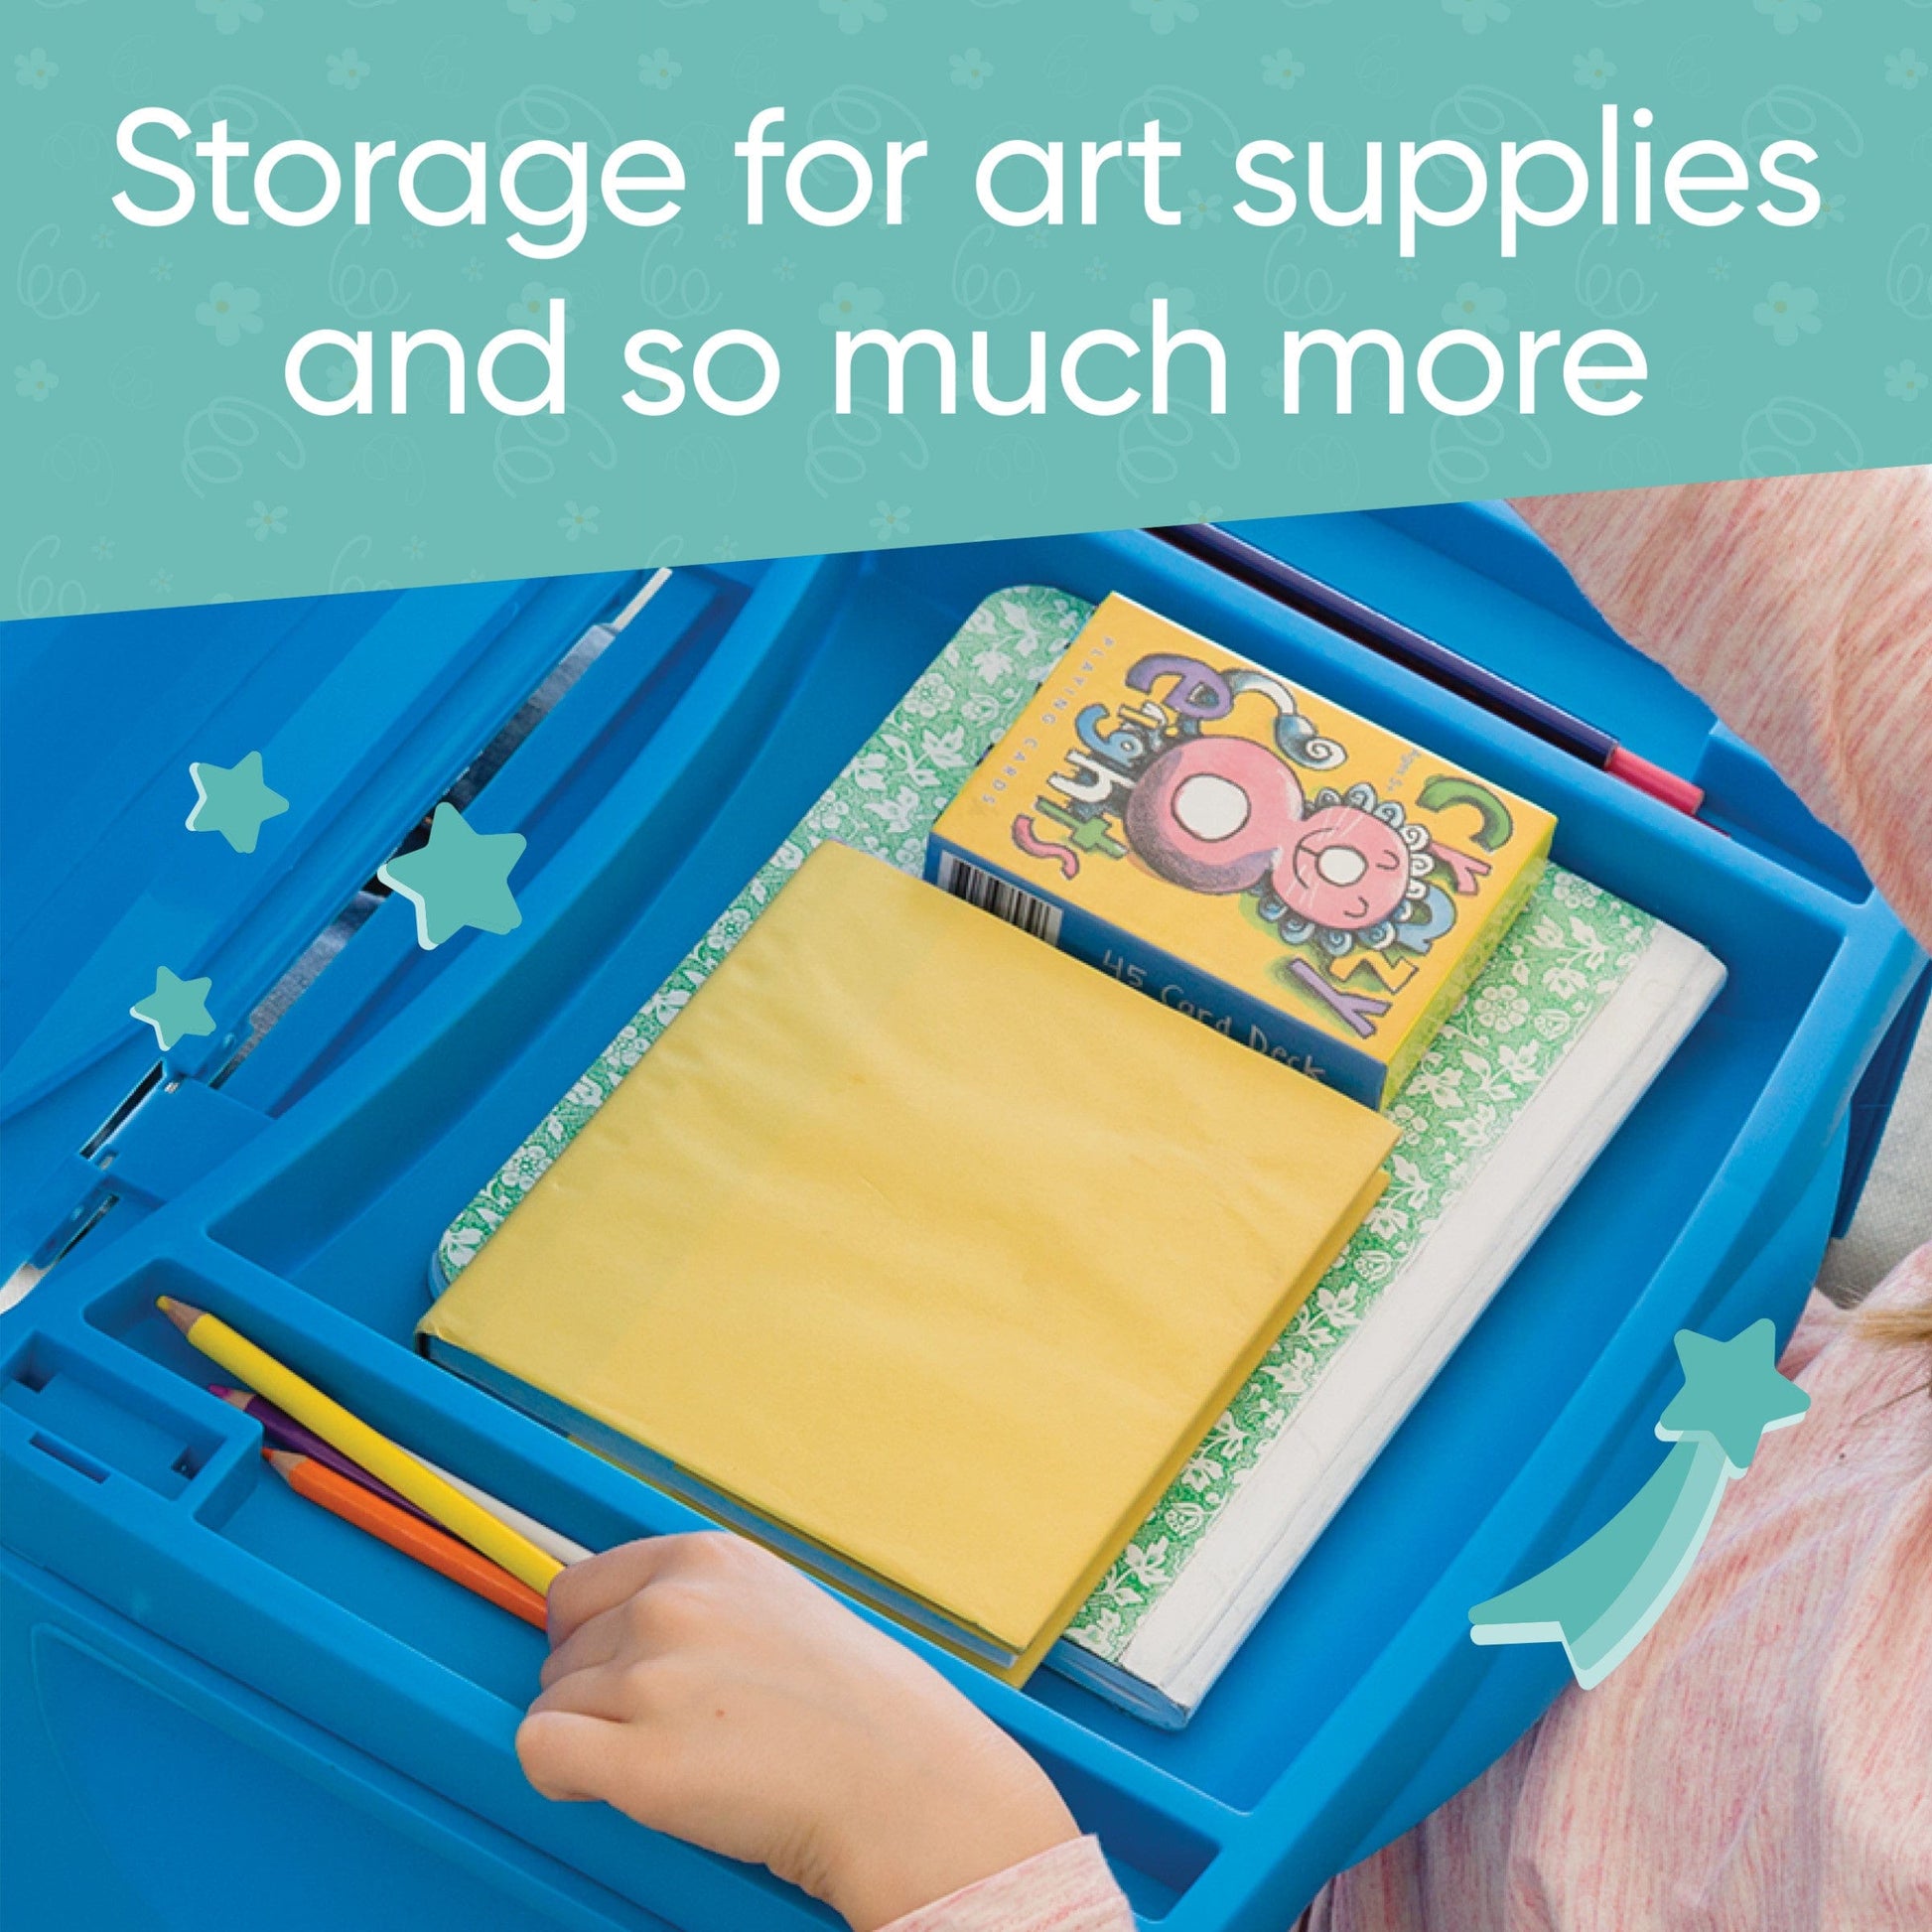 Art Tool and Sketch Boxes in Craft Storage 